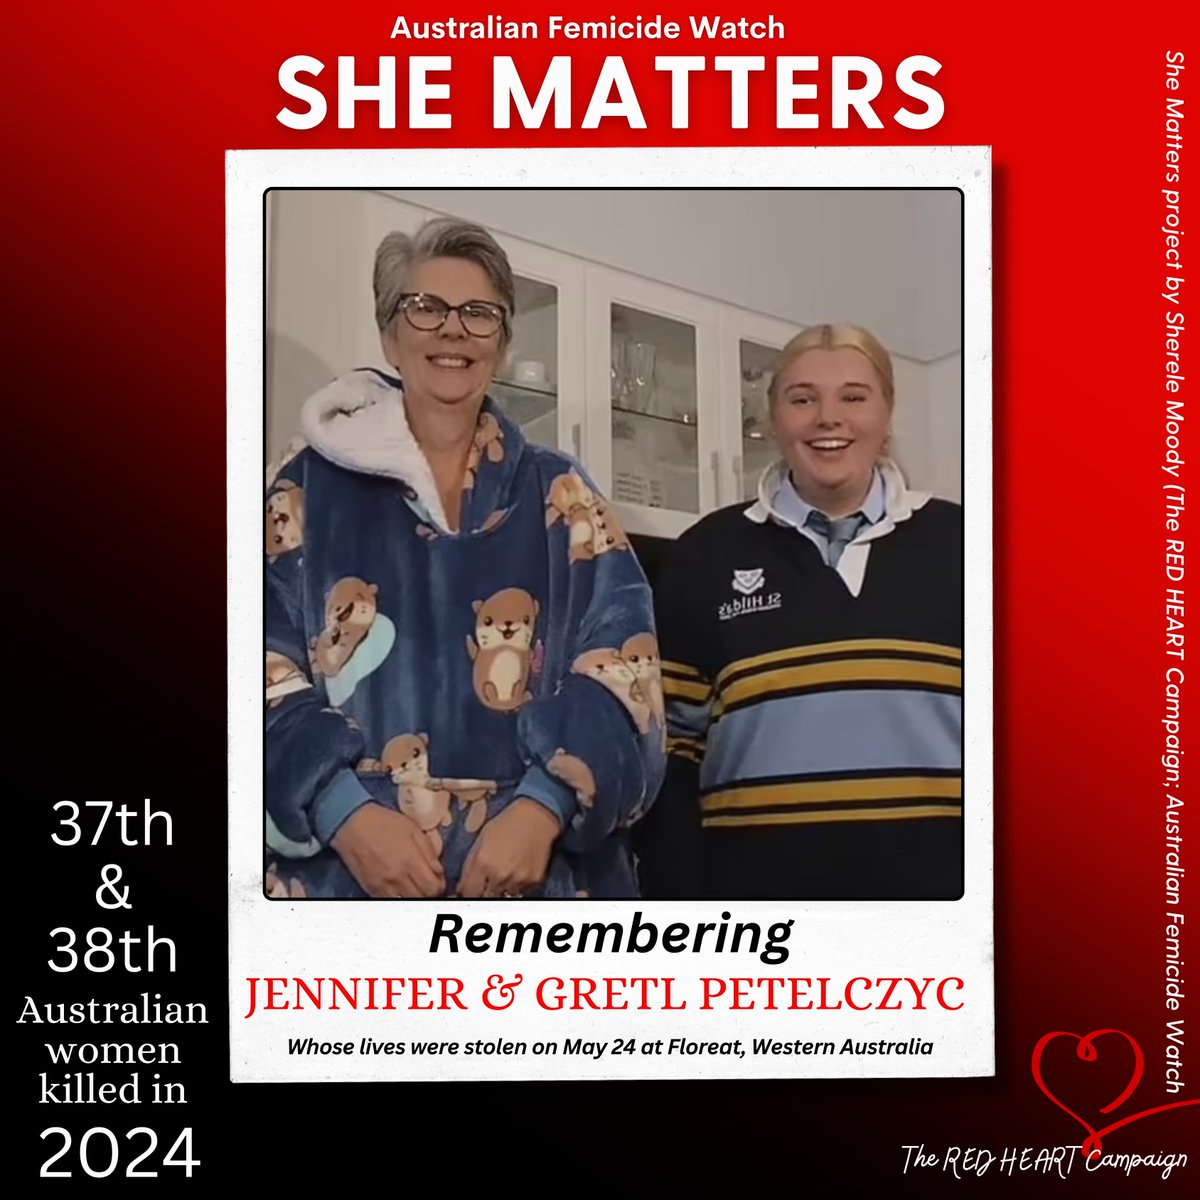 ❤️SHE MATTERS: JENNIFER & GRETL PETELCZYC!❤️ For as long as men have been committing violence against women, women have been offering shelter, safety and support for women escaping that violence. And now we can't even support our mates, without being killed. Jennifer Petelczyc